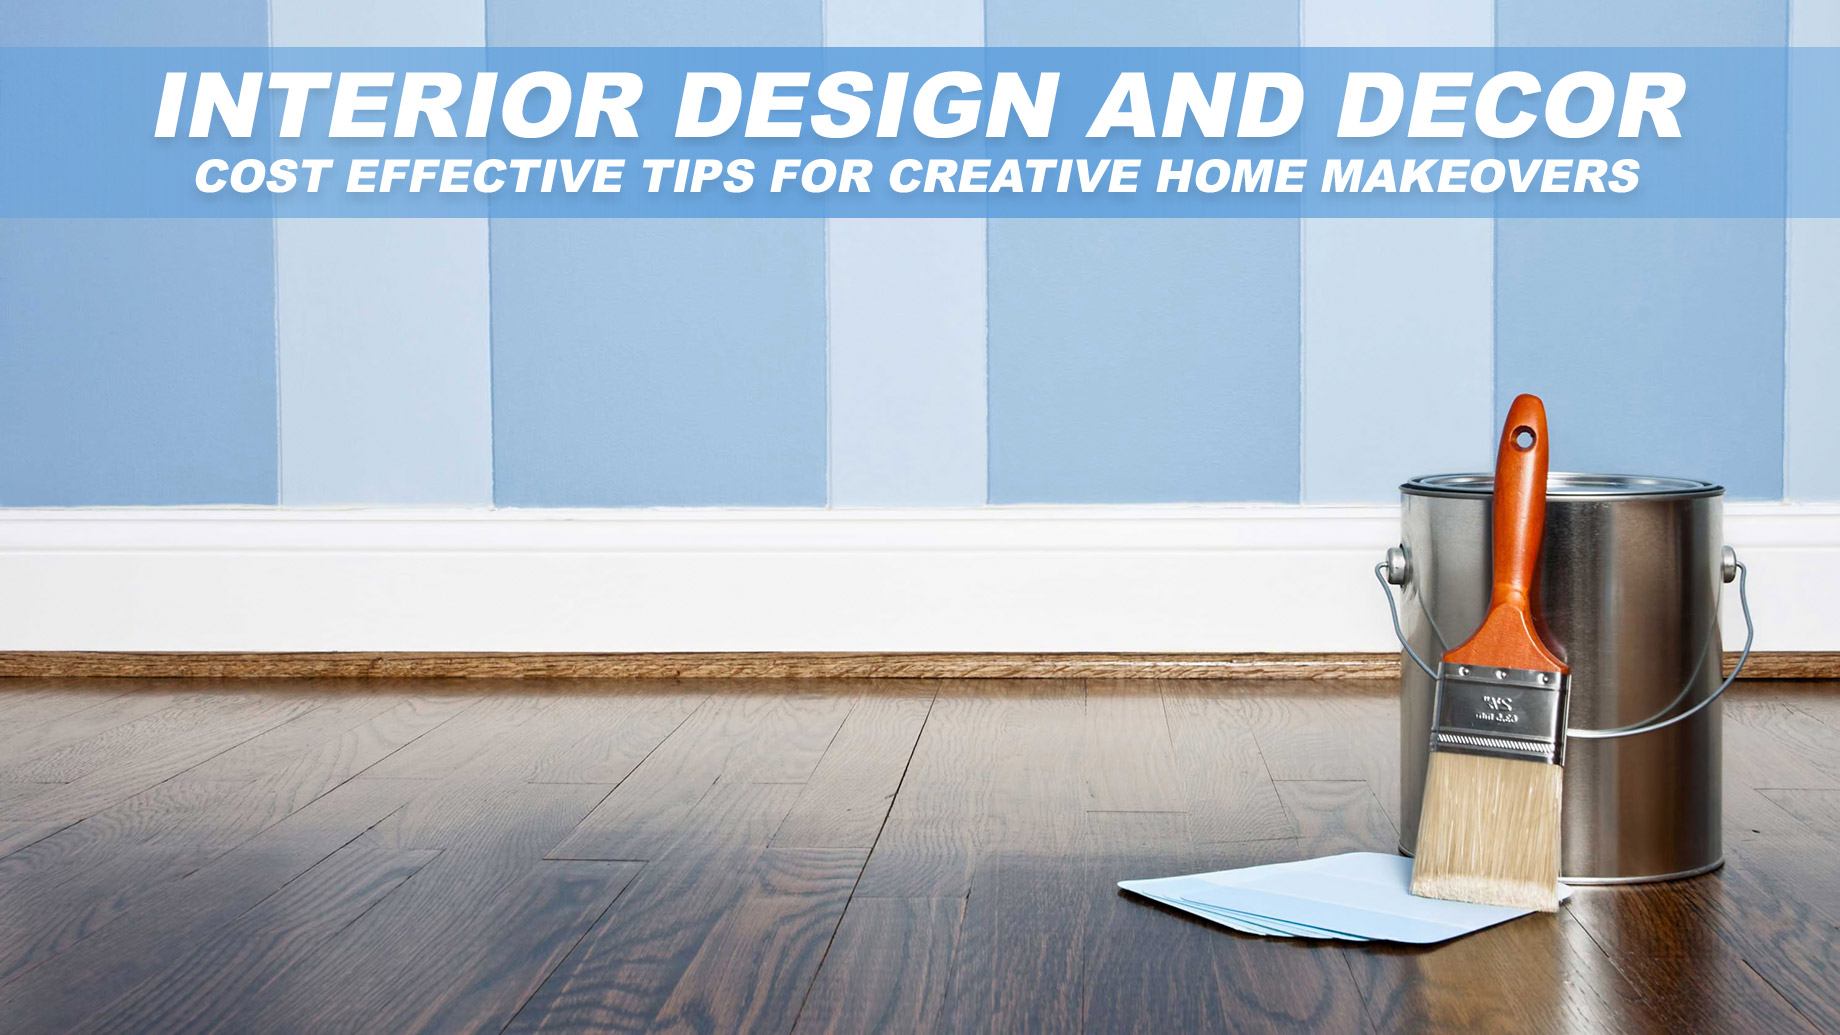 Interior Design and Decor - Cost Effective Tips For Creative Home Makeovers